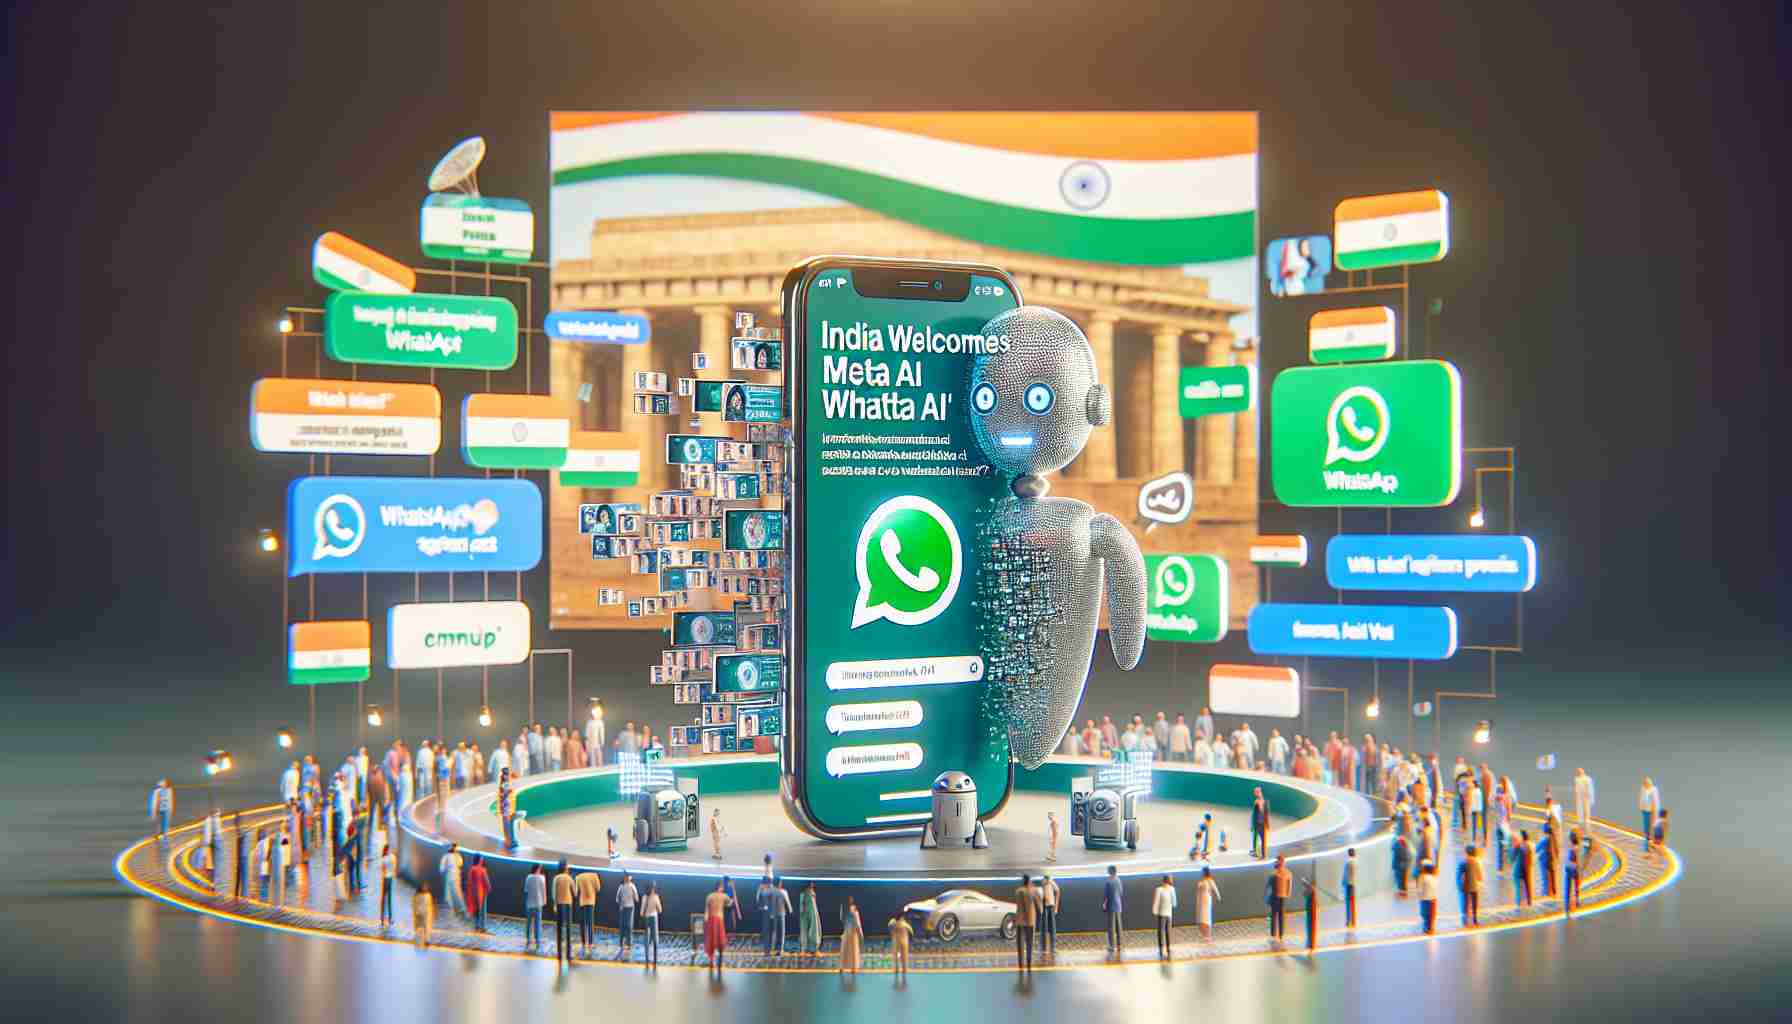 India Welcomes Meta AI: An Innovative Chatbot Experience on WhatsApp